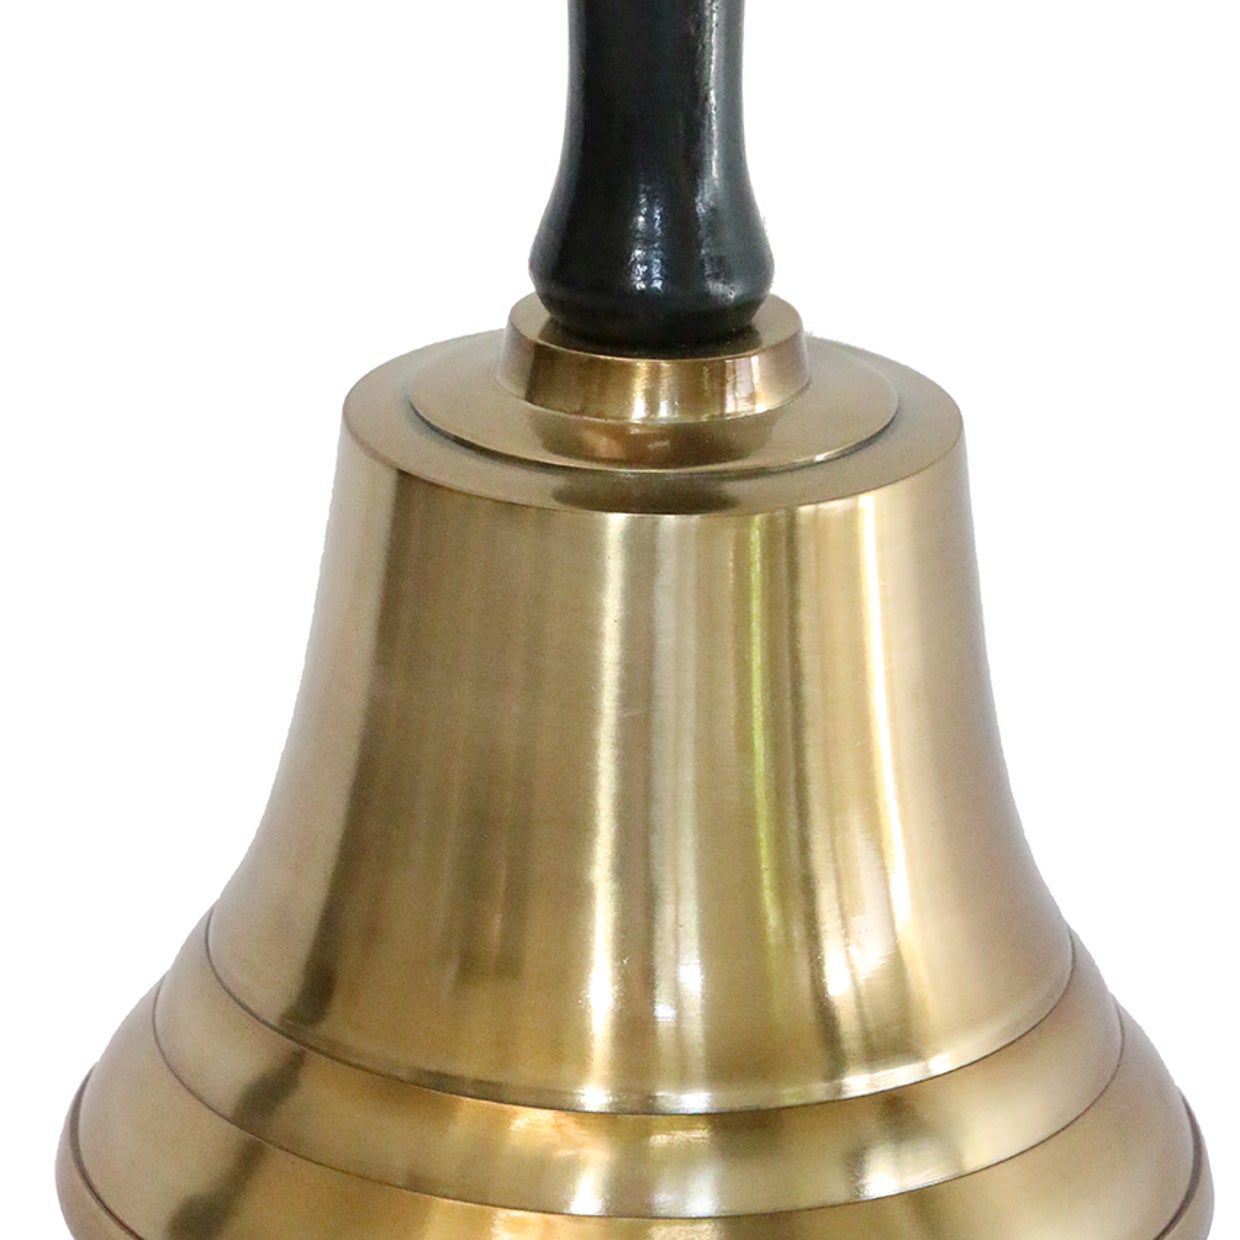 Bell in Brass Finish with Wooden Handle